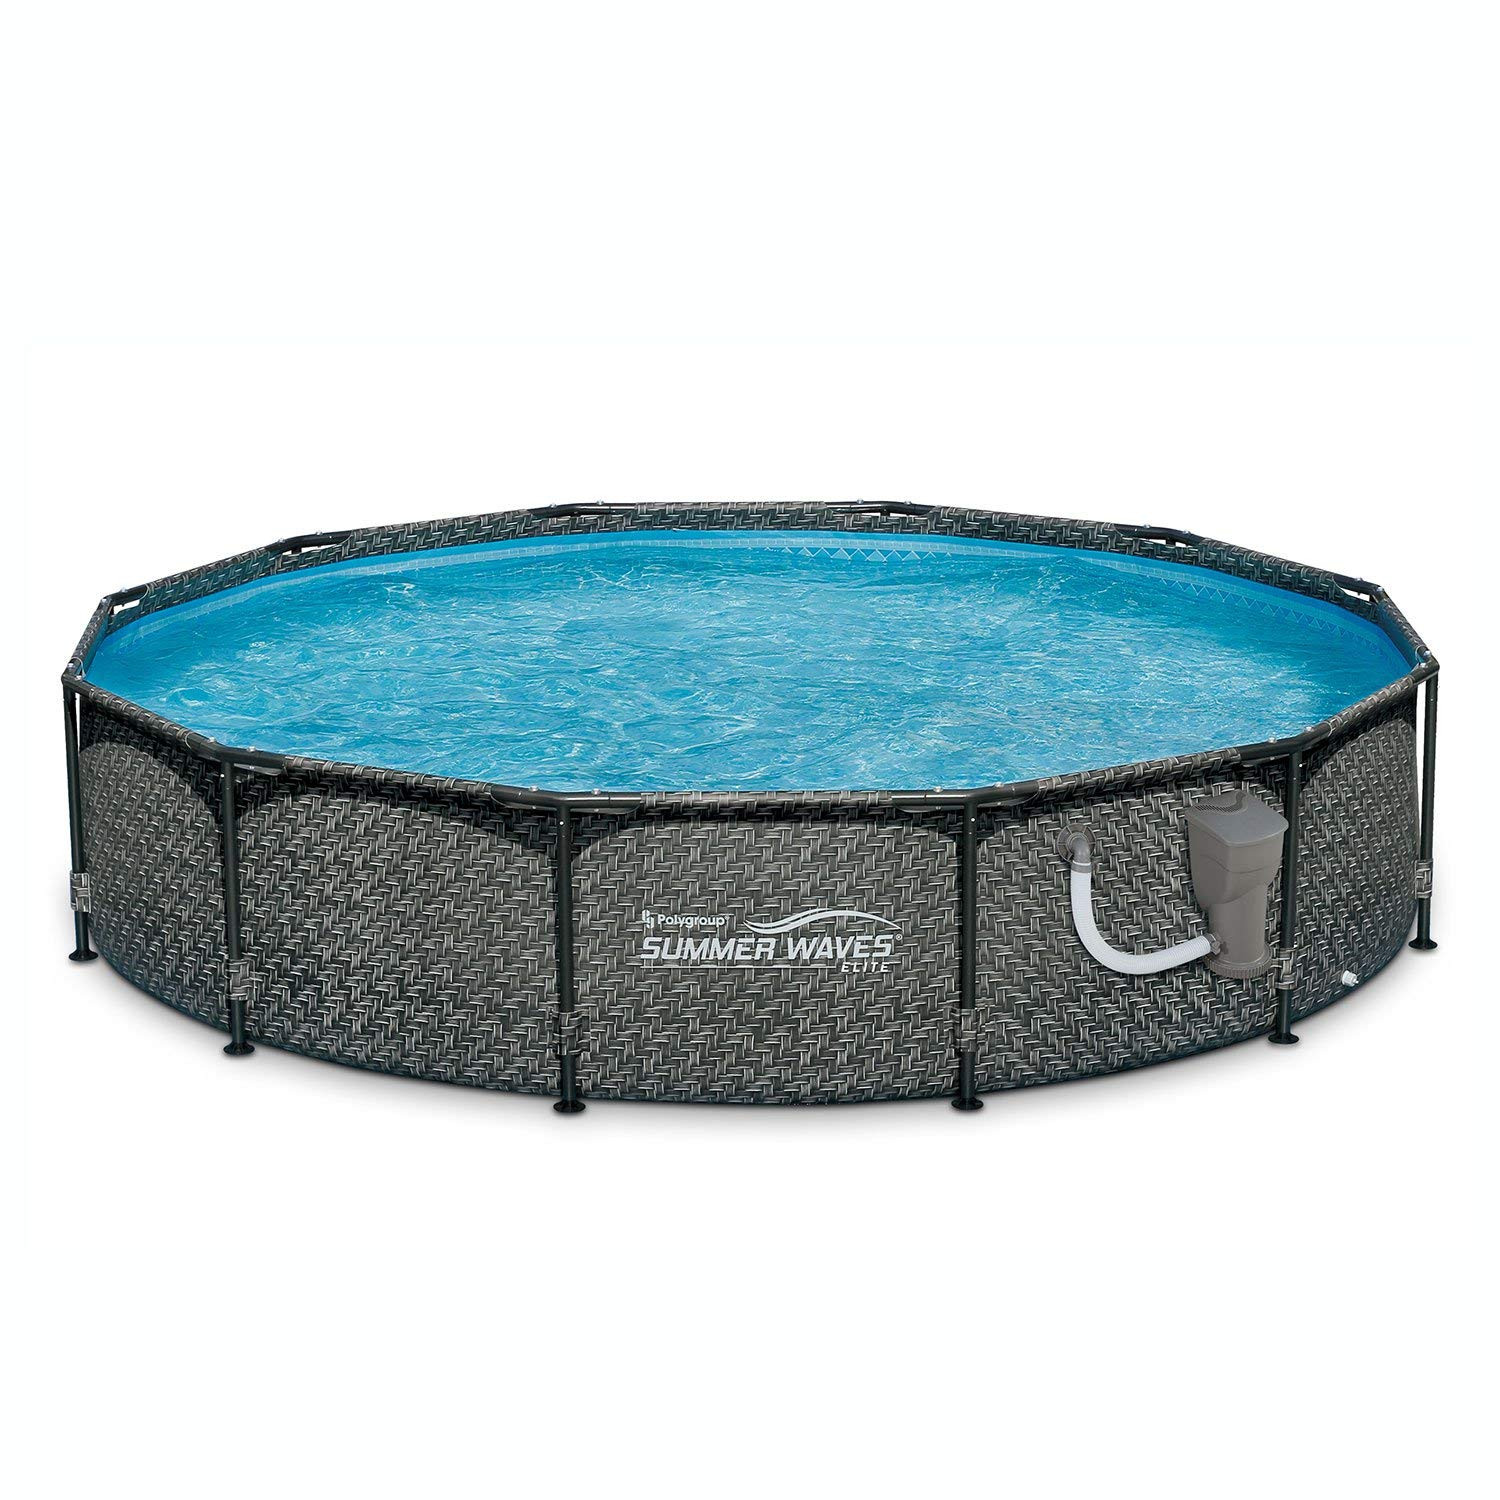 33 Above Ground Pool
 Top 10 Best Ground Pools Top Value Reviews